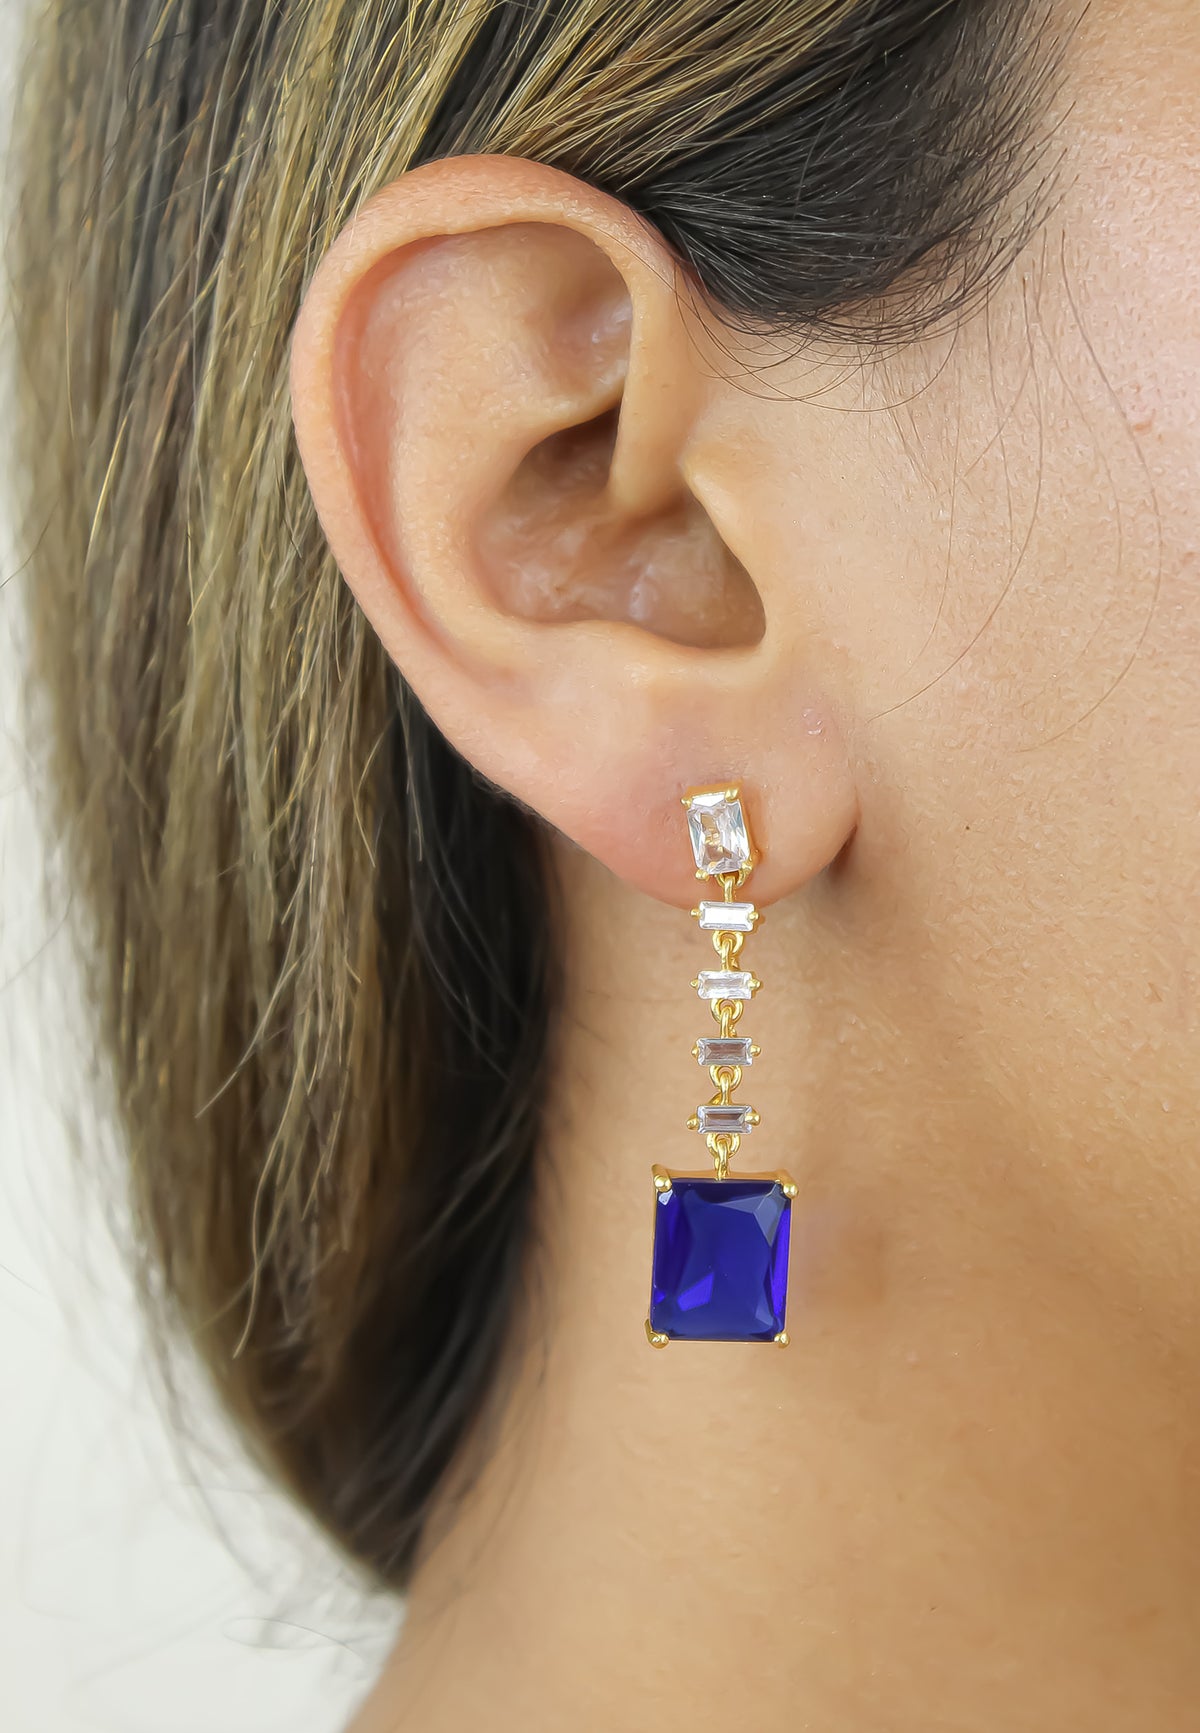 Cruise Viper Earrings by Bombay Sunset Amethyst